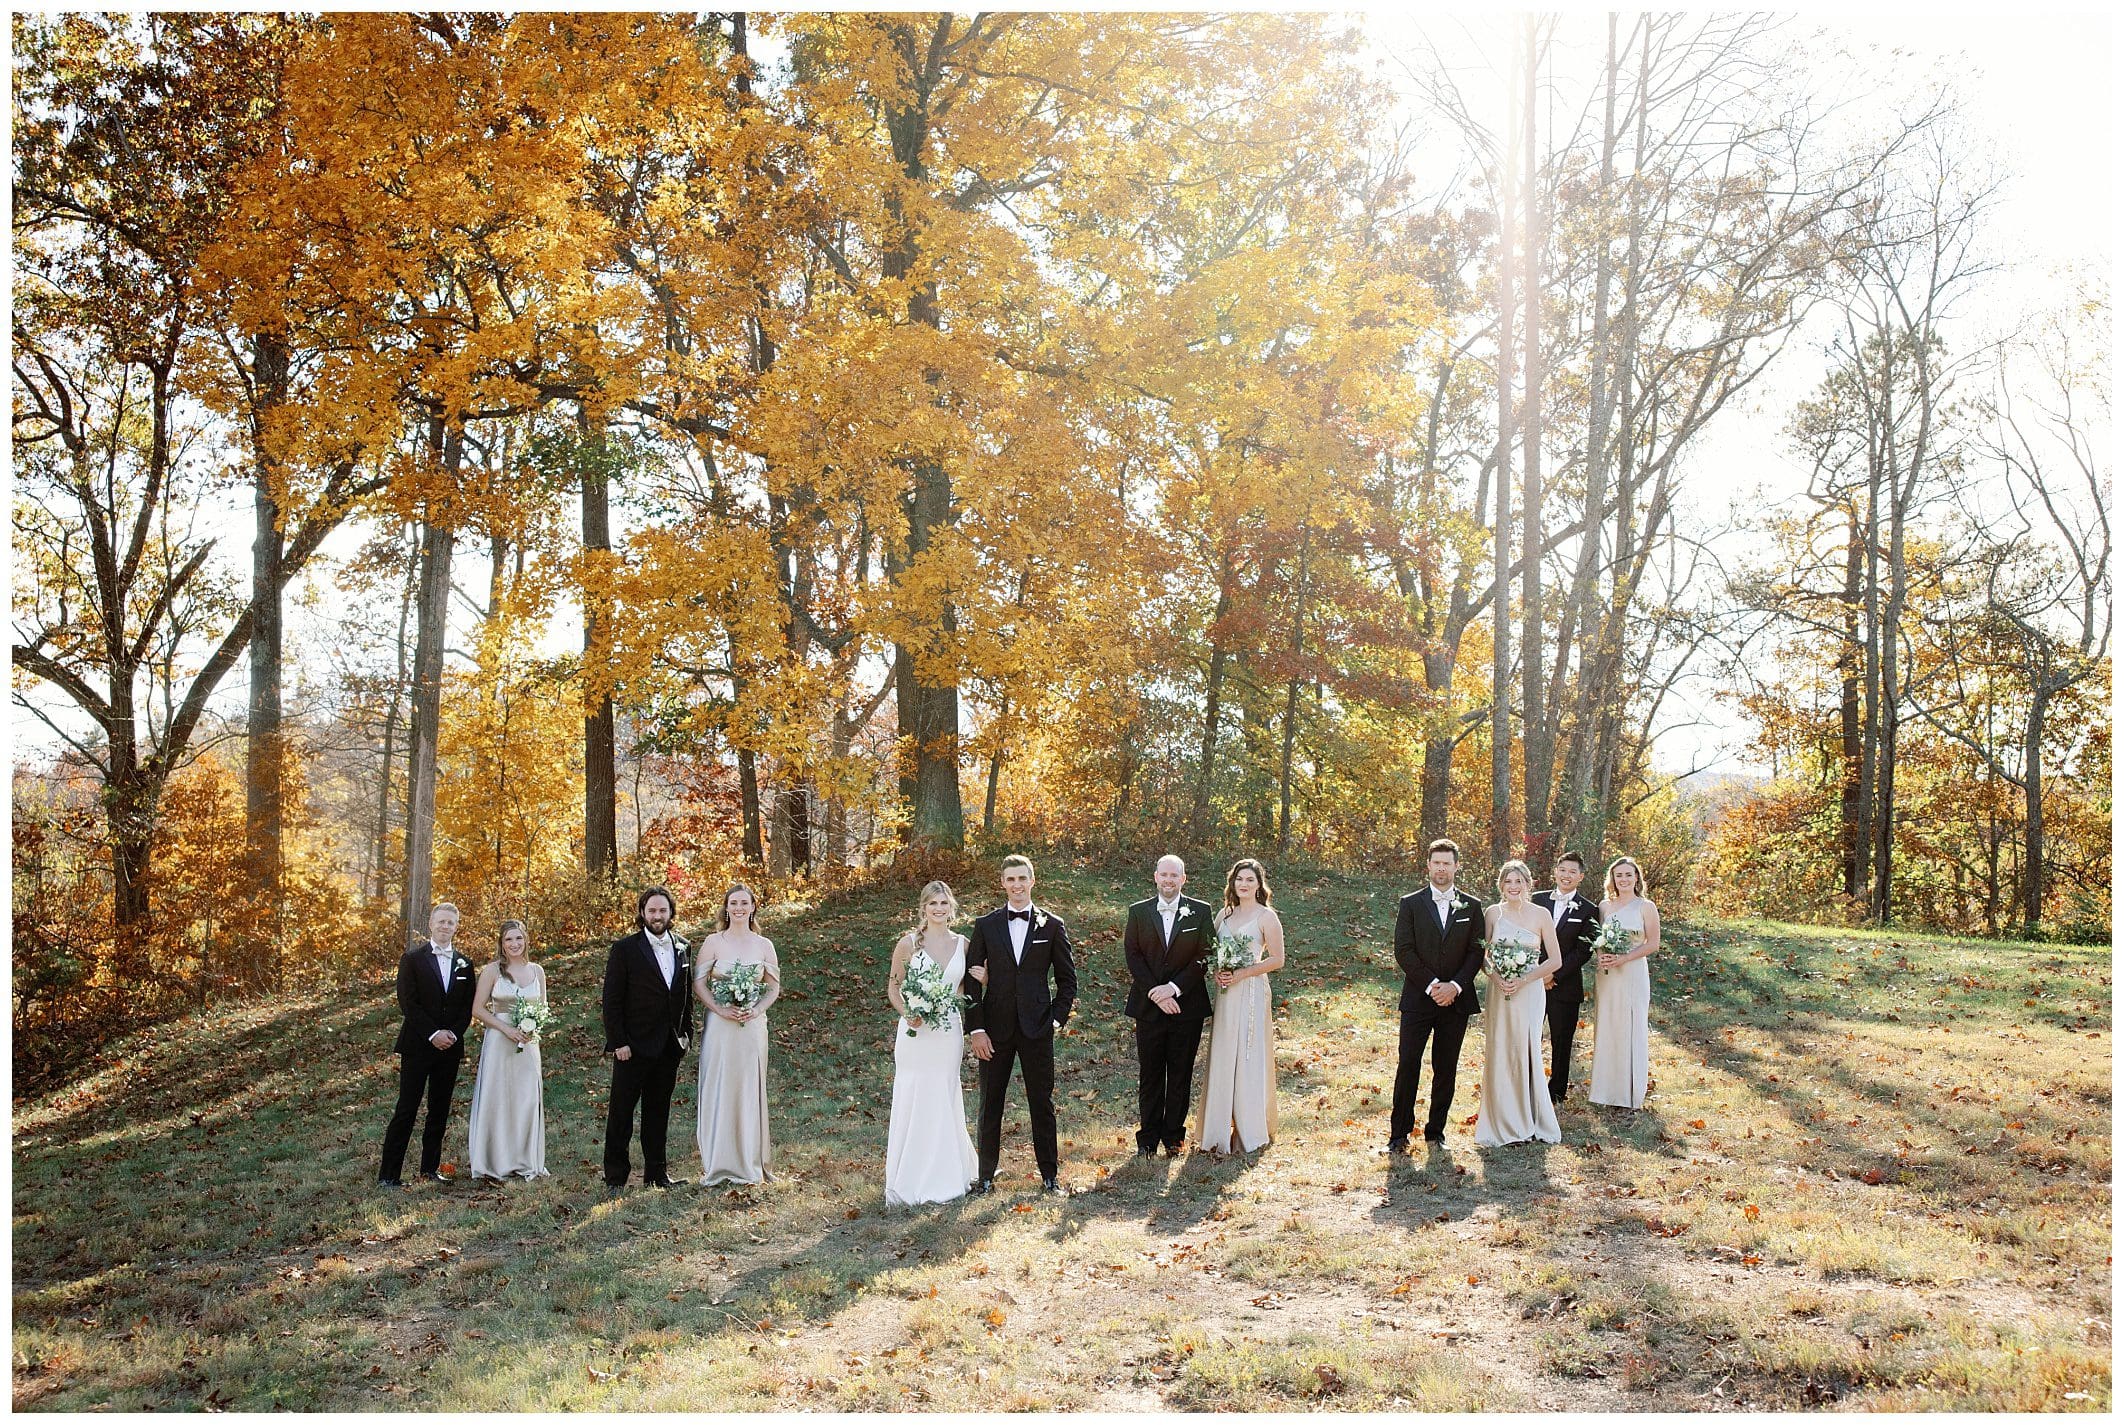 A group of bridesmaids and groomsmen standing in front of trees at a fall wedding at crest center.